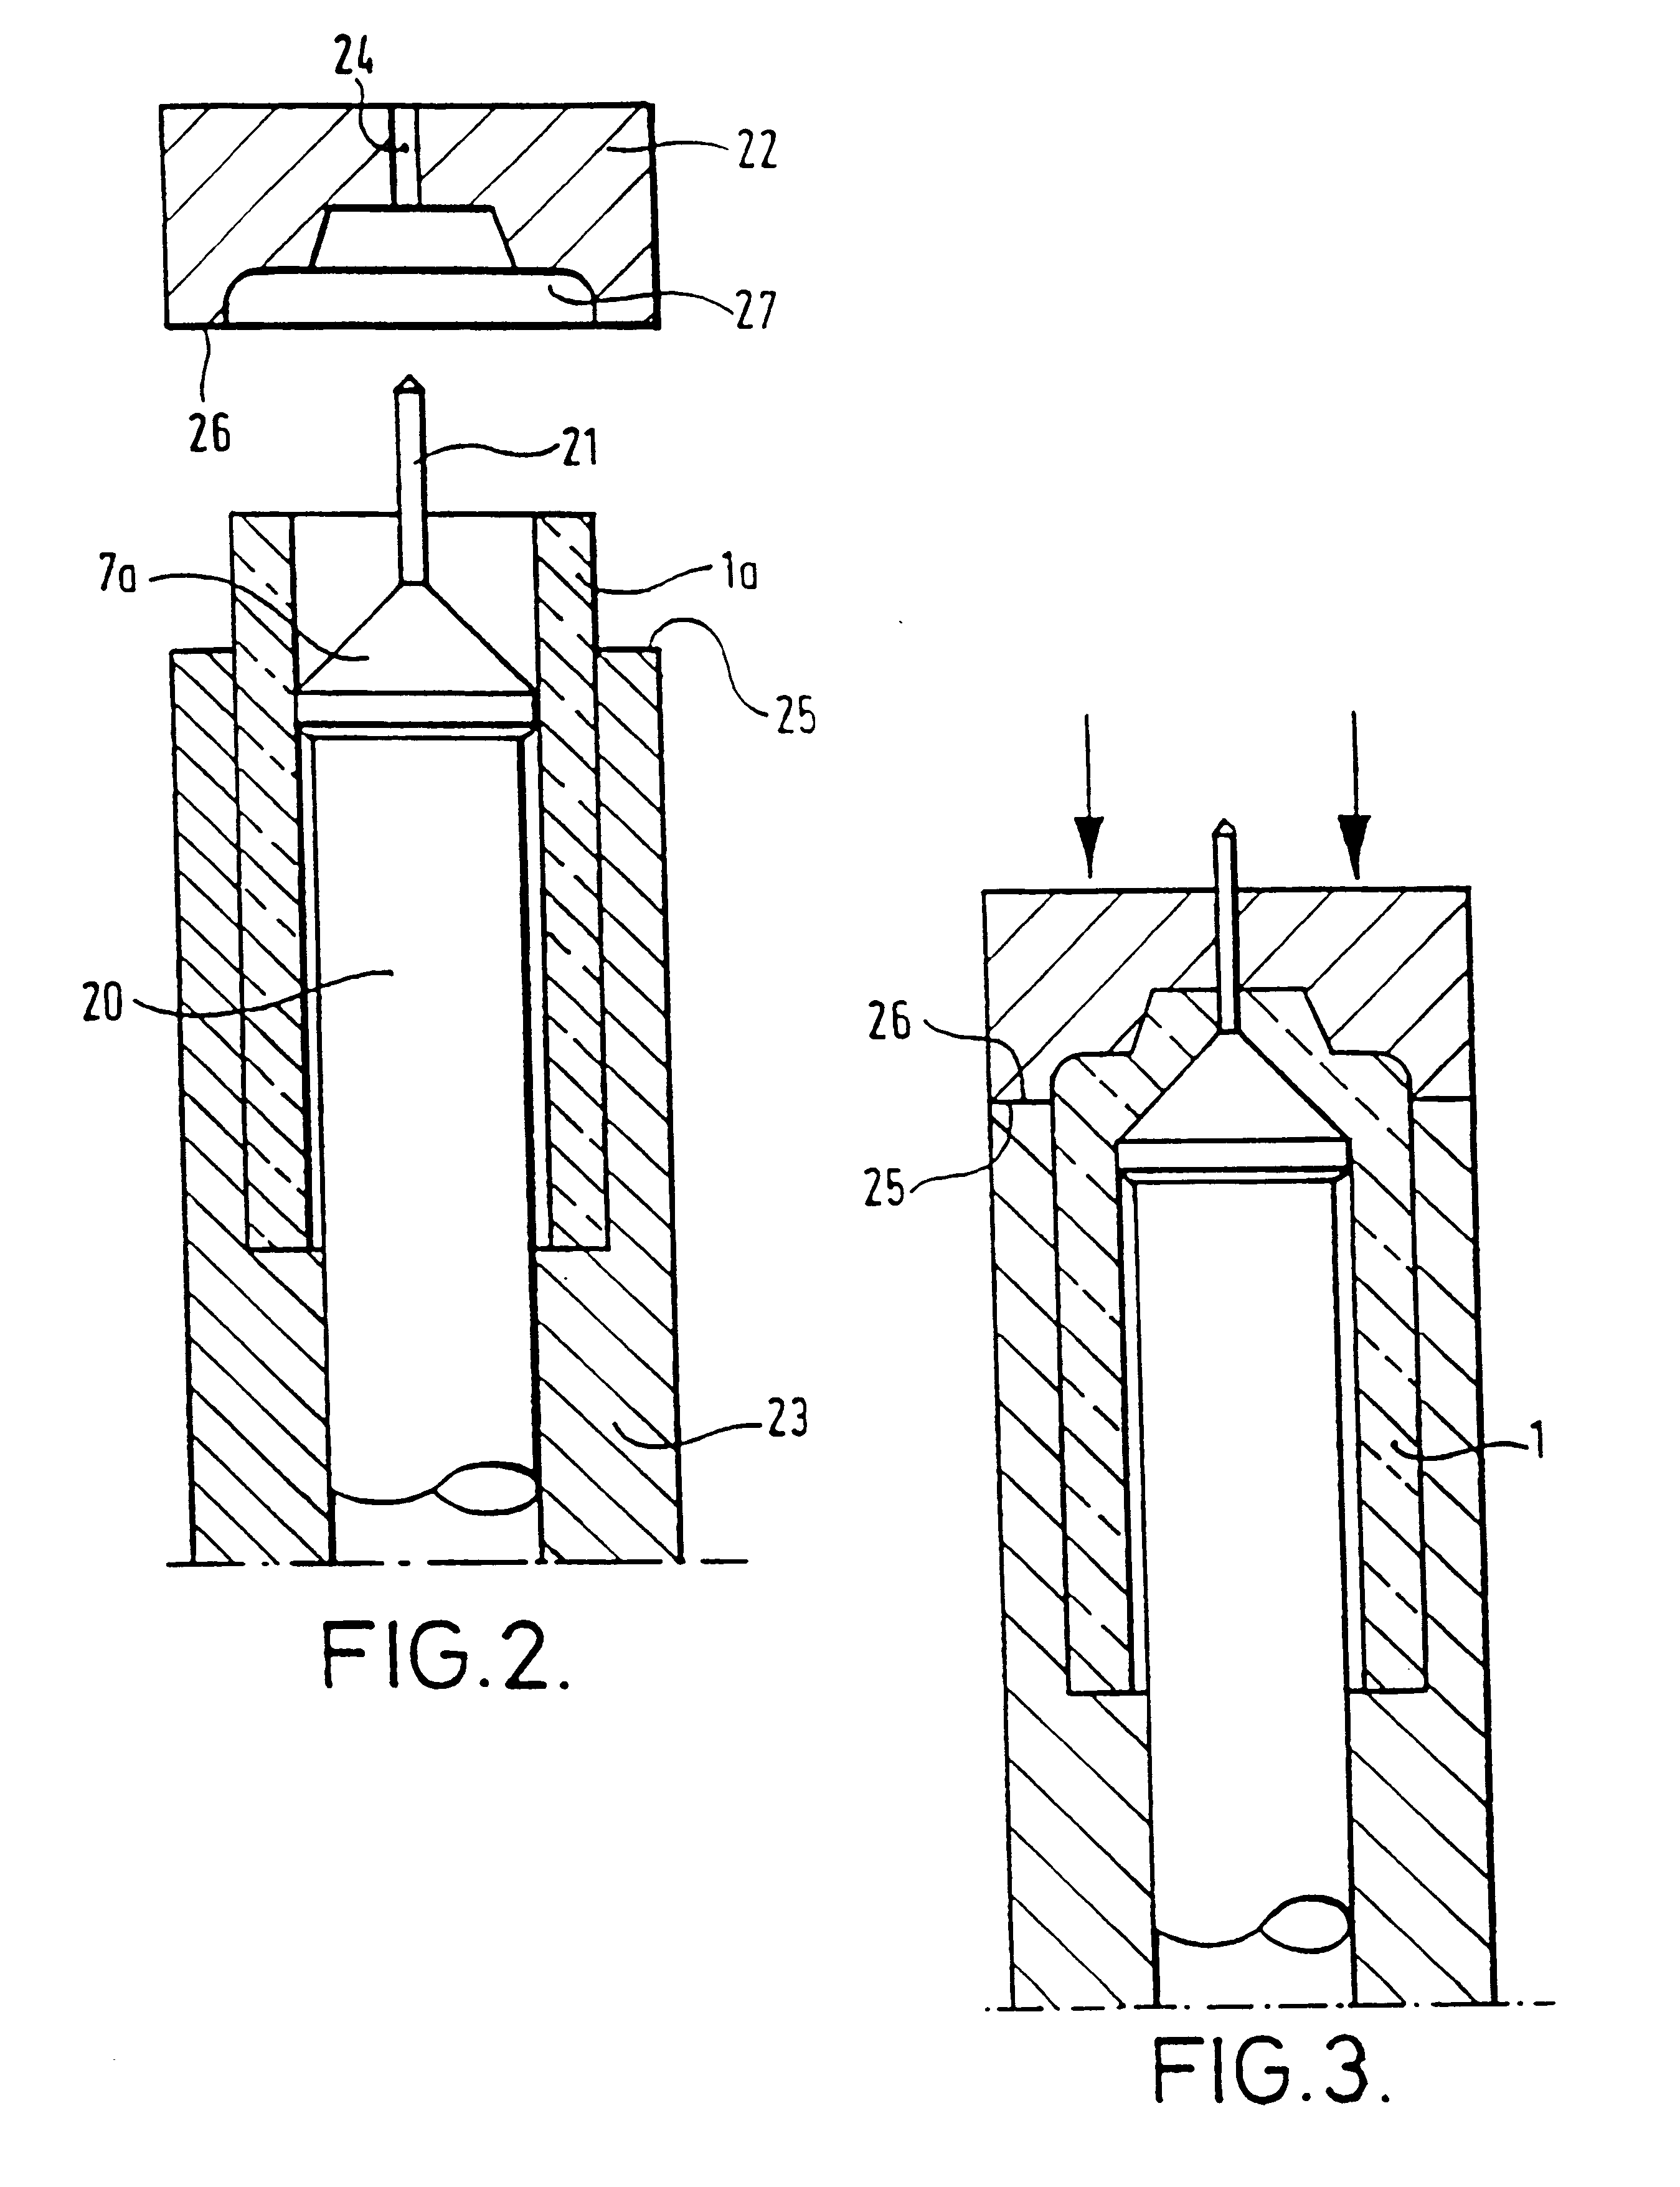 Method and apparatus for making an article from a formable material